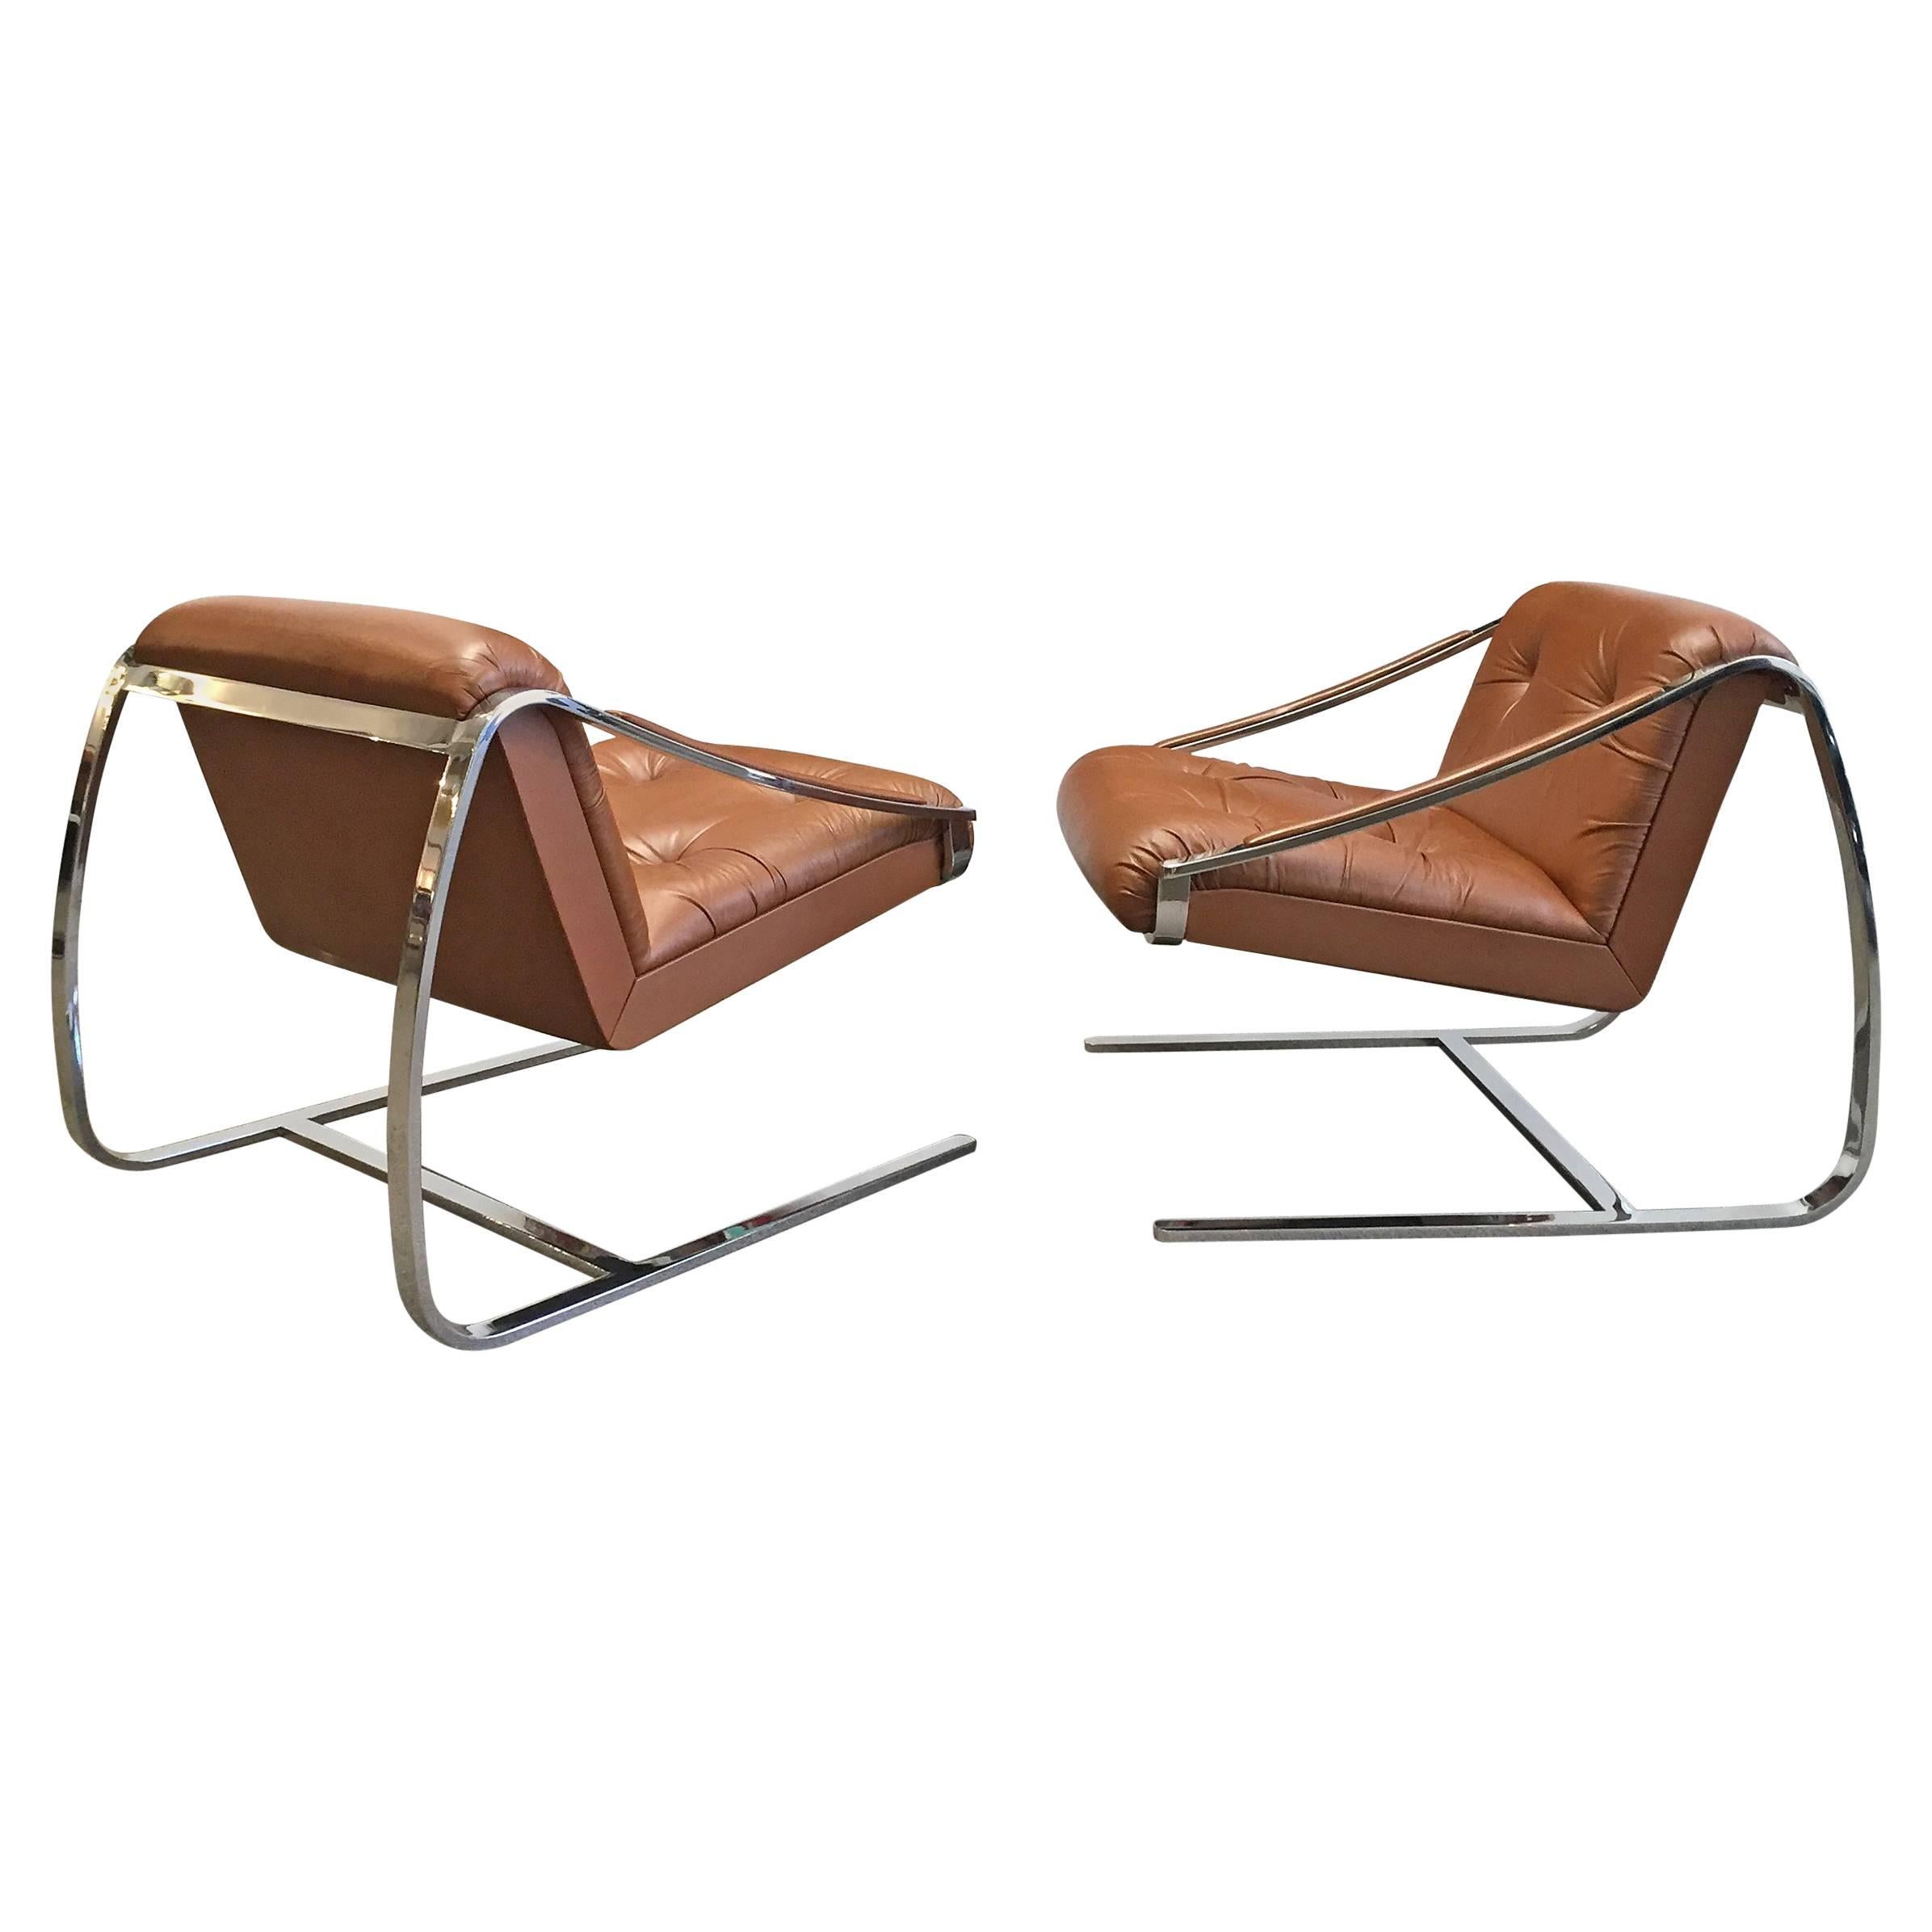 Lounge Chairs by Brueton 1970s Pair of Steel and Leather "Plaza" 